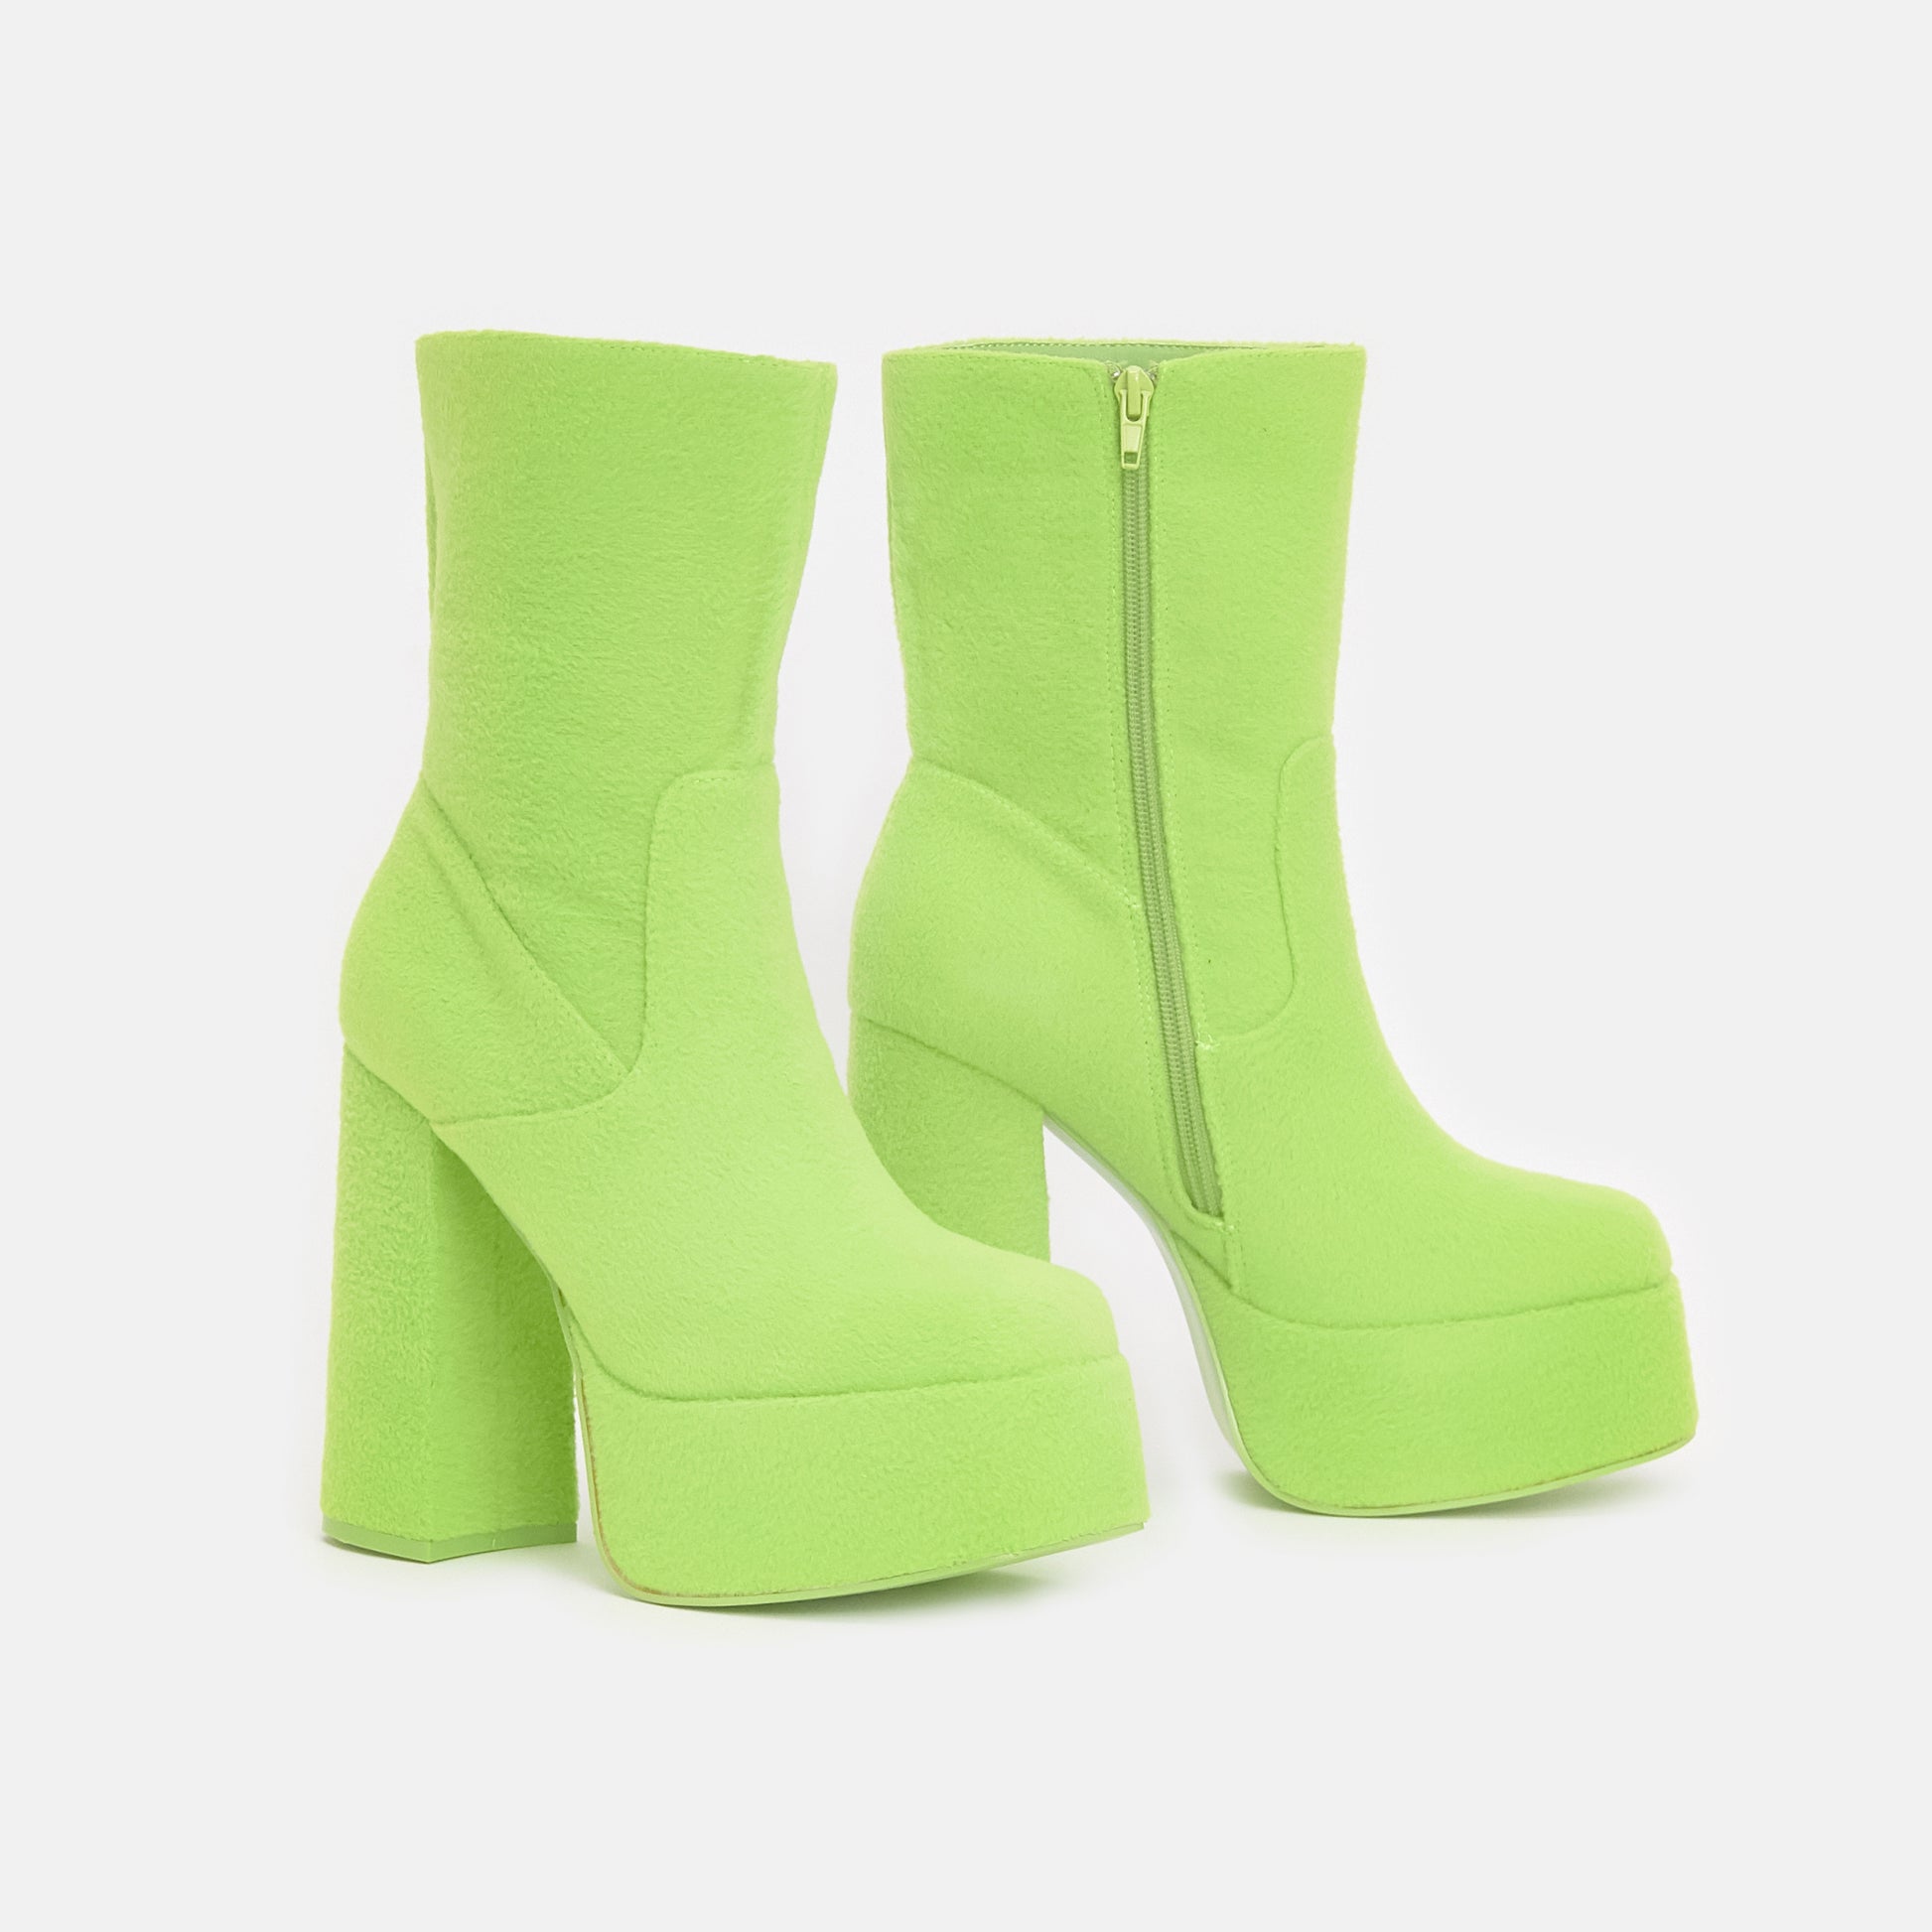 Dipsy Fluffy Platform Boots - Ankle Boots - KOI Footwear - Green - Three-Quarter View